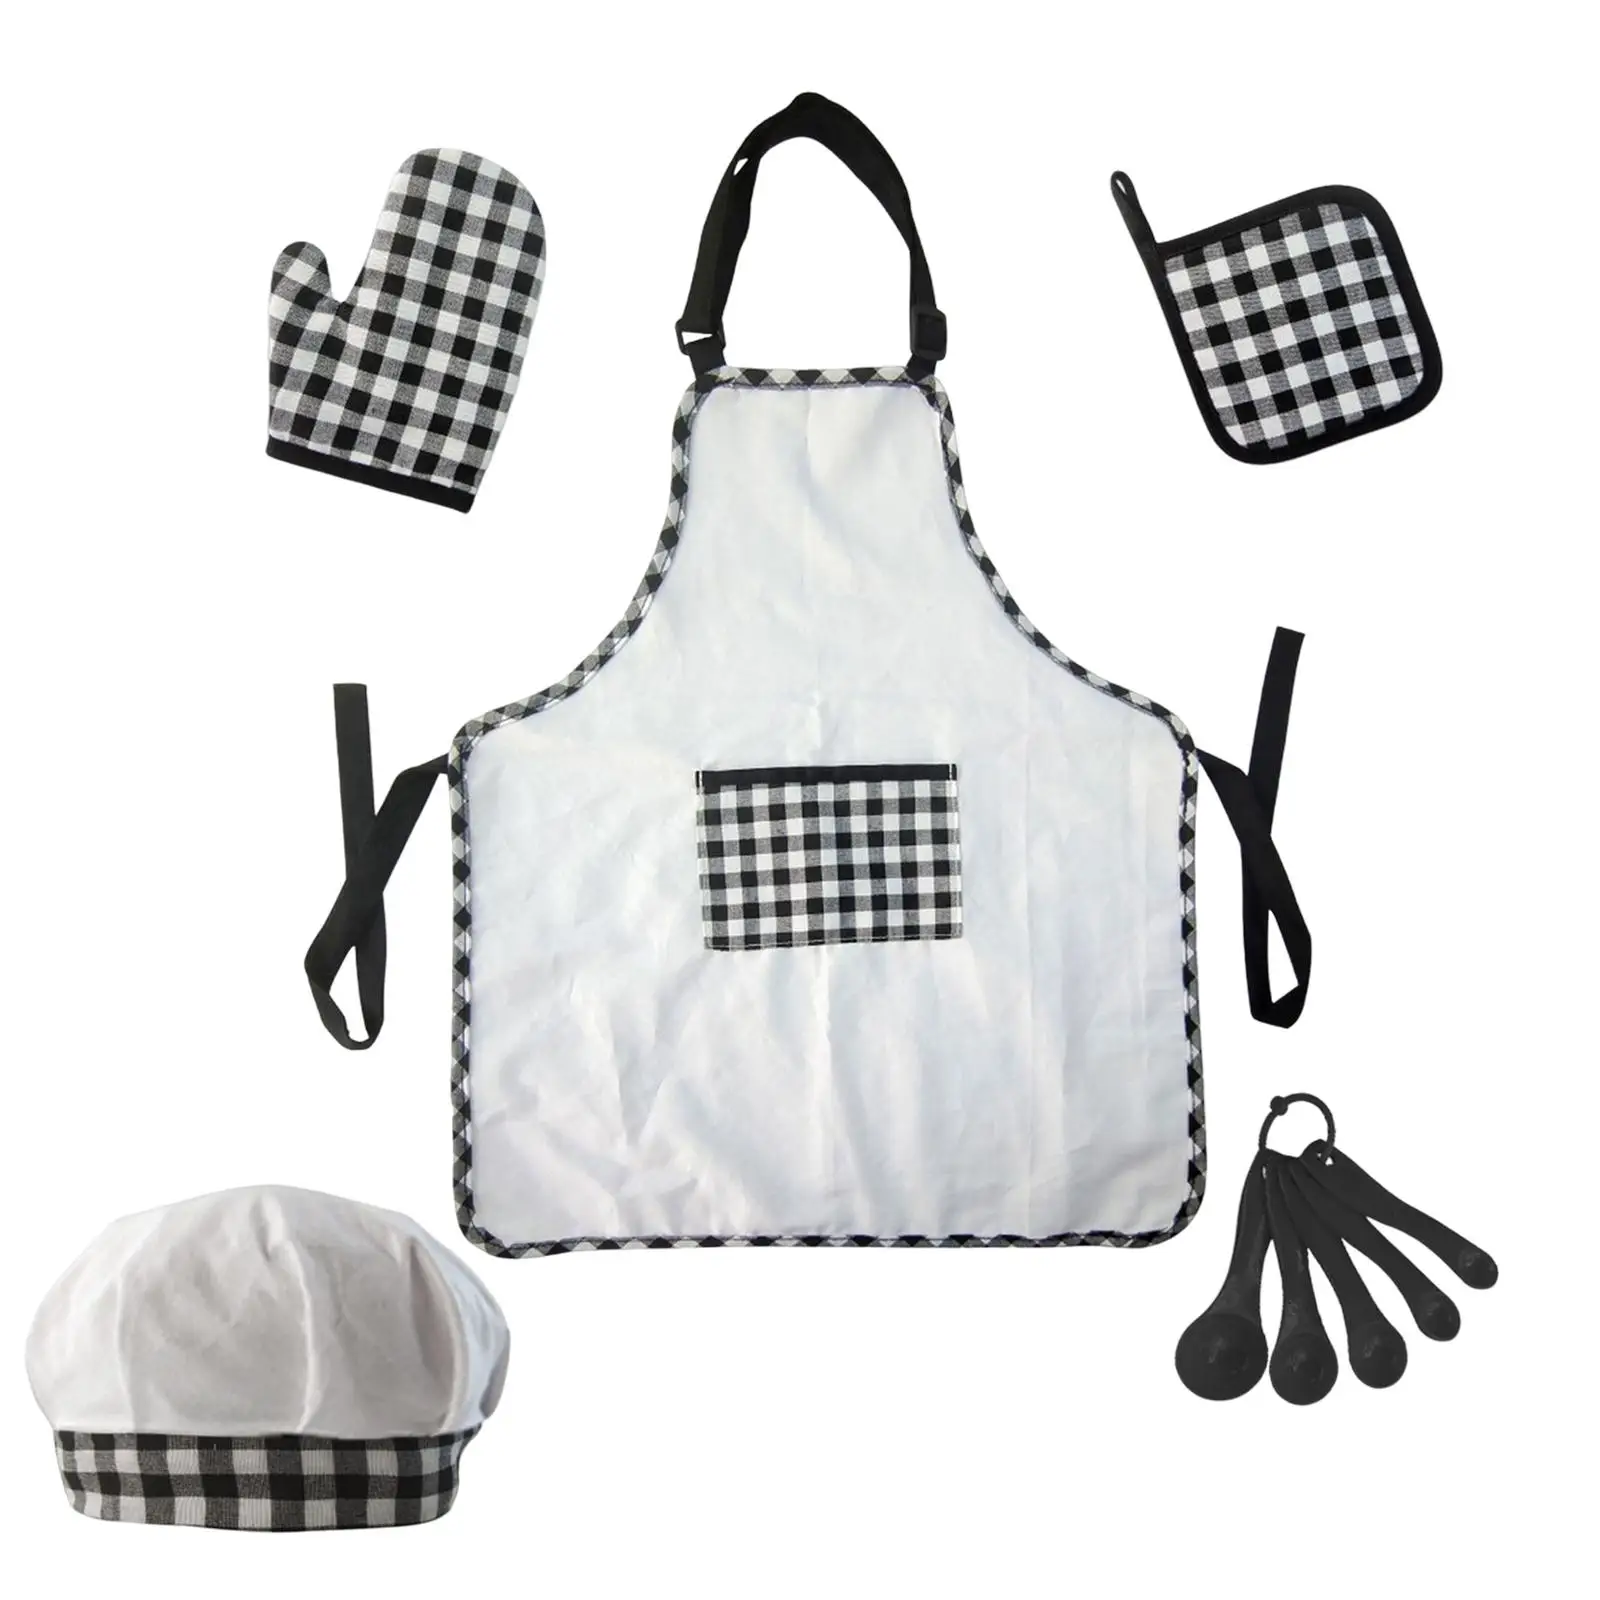 Cooking and Baking Set Bake Supplies Accessories Chef Hat Spoon Oven gloves